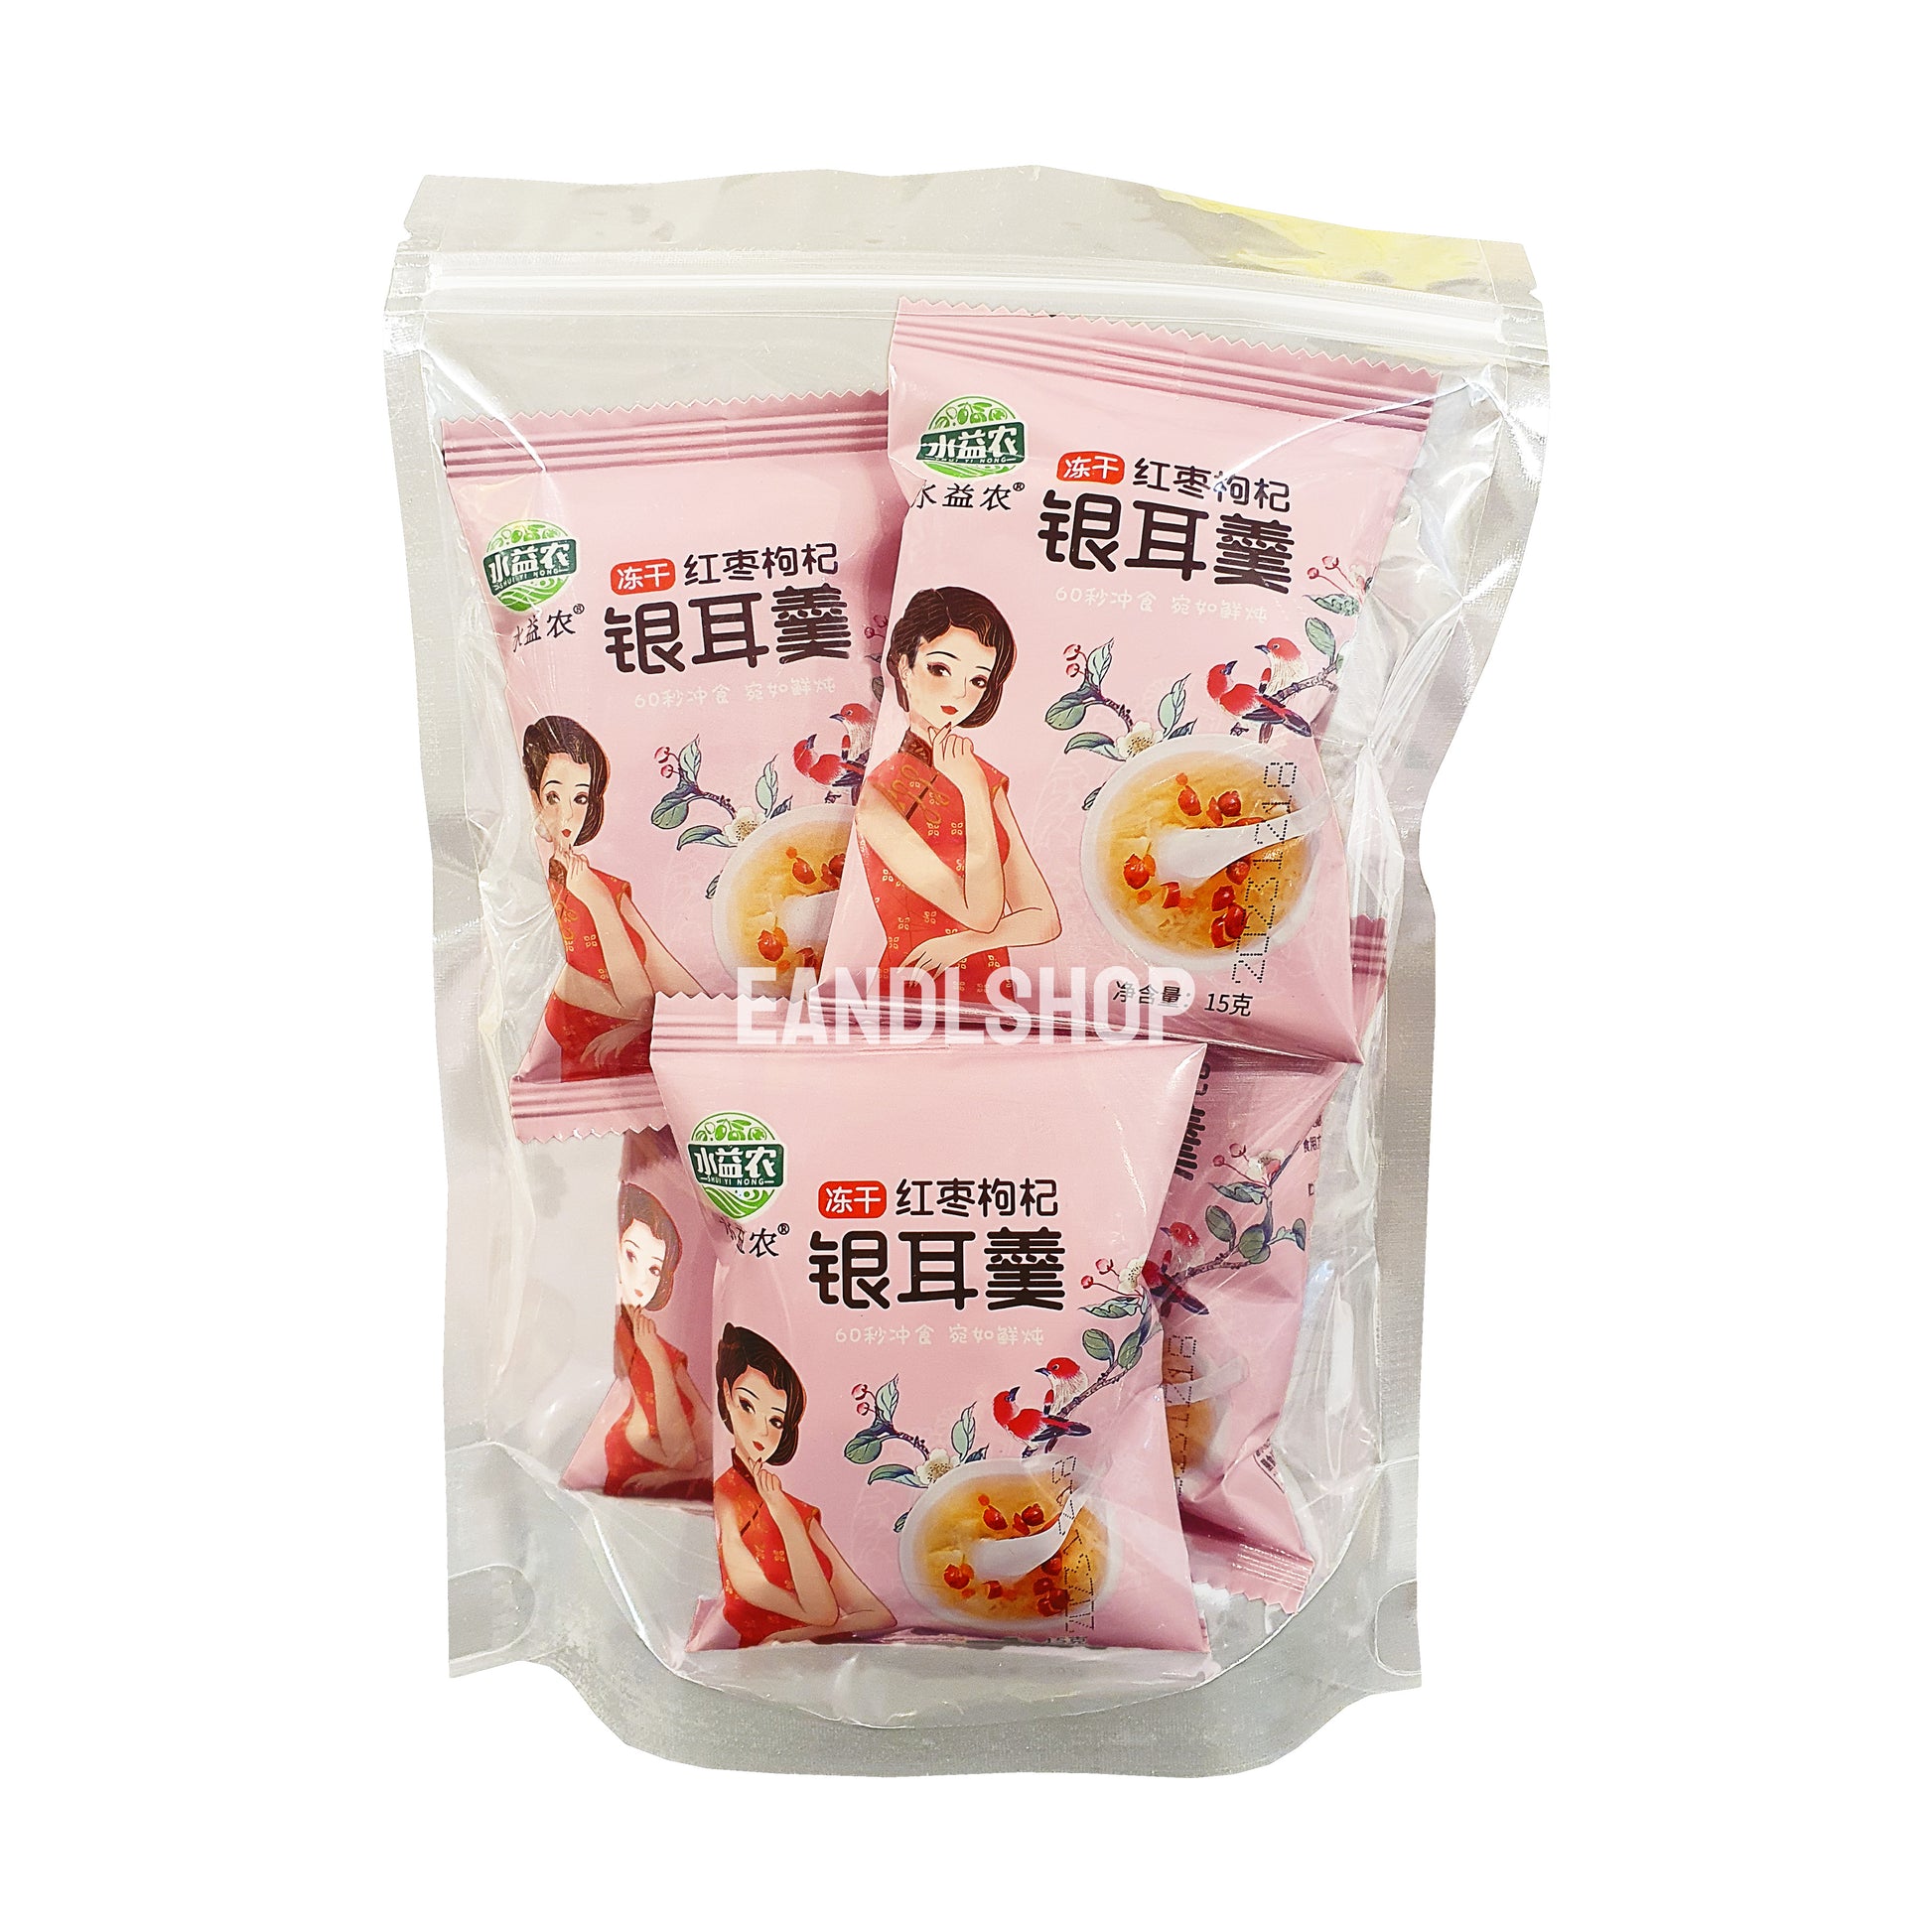 Red Dates Wolfberry White Fungus.Old-school biscuits, modern snacks (chips, crackers), cakes, gummies, plums, dried fruits, nuts, herbal tea – available at www.EANDLSHOP.com